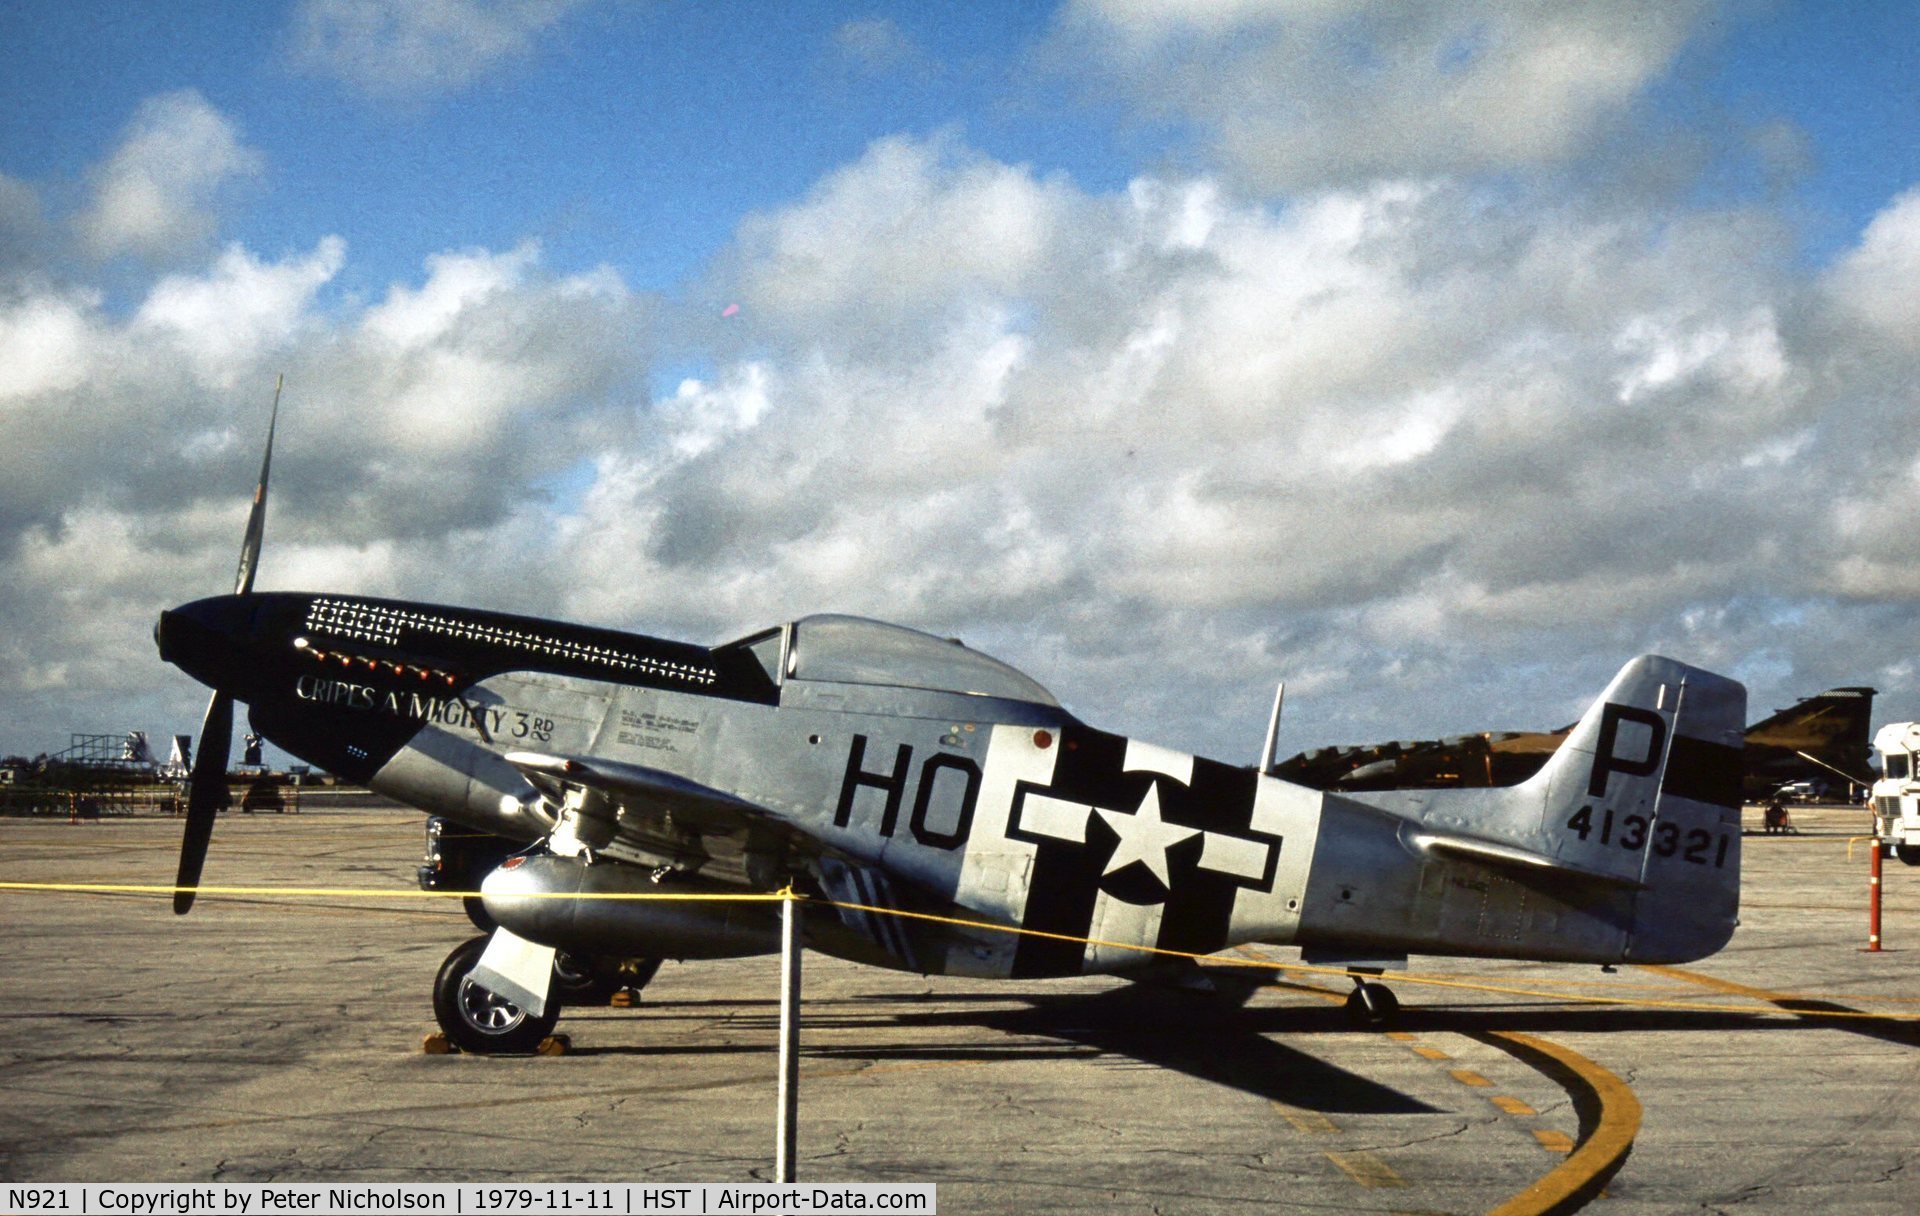 N921, 1945 North American P-51D Mustang C/N 124-48260 (45-11507), P-51D NL921 Mustang 45-11507 as 44-13321 Cripes a Mighty 3rd at the 1979 Homestead AFB Open House.